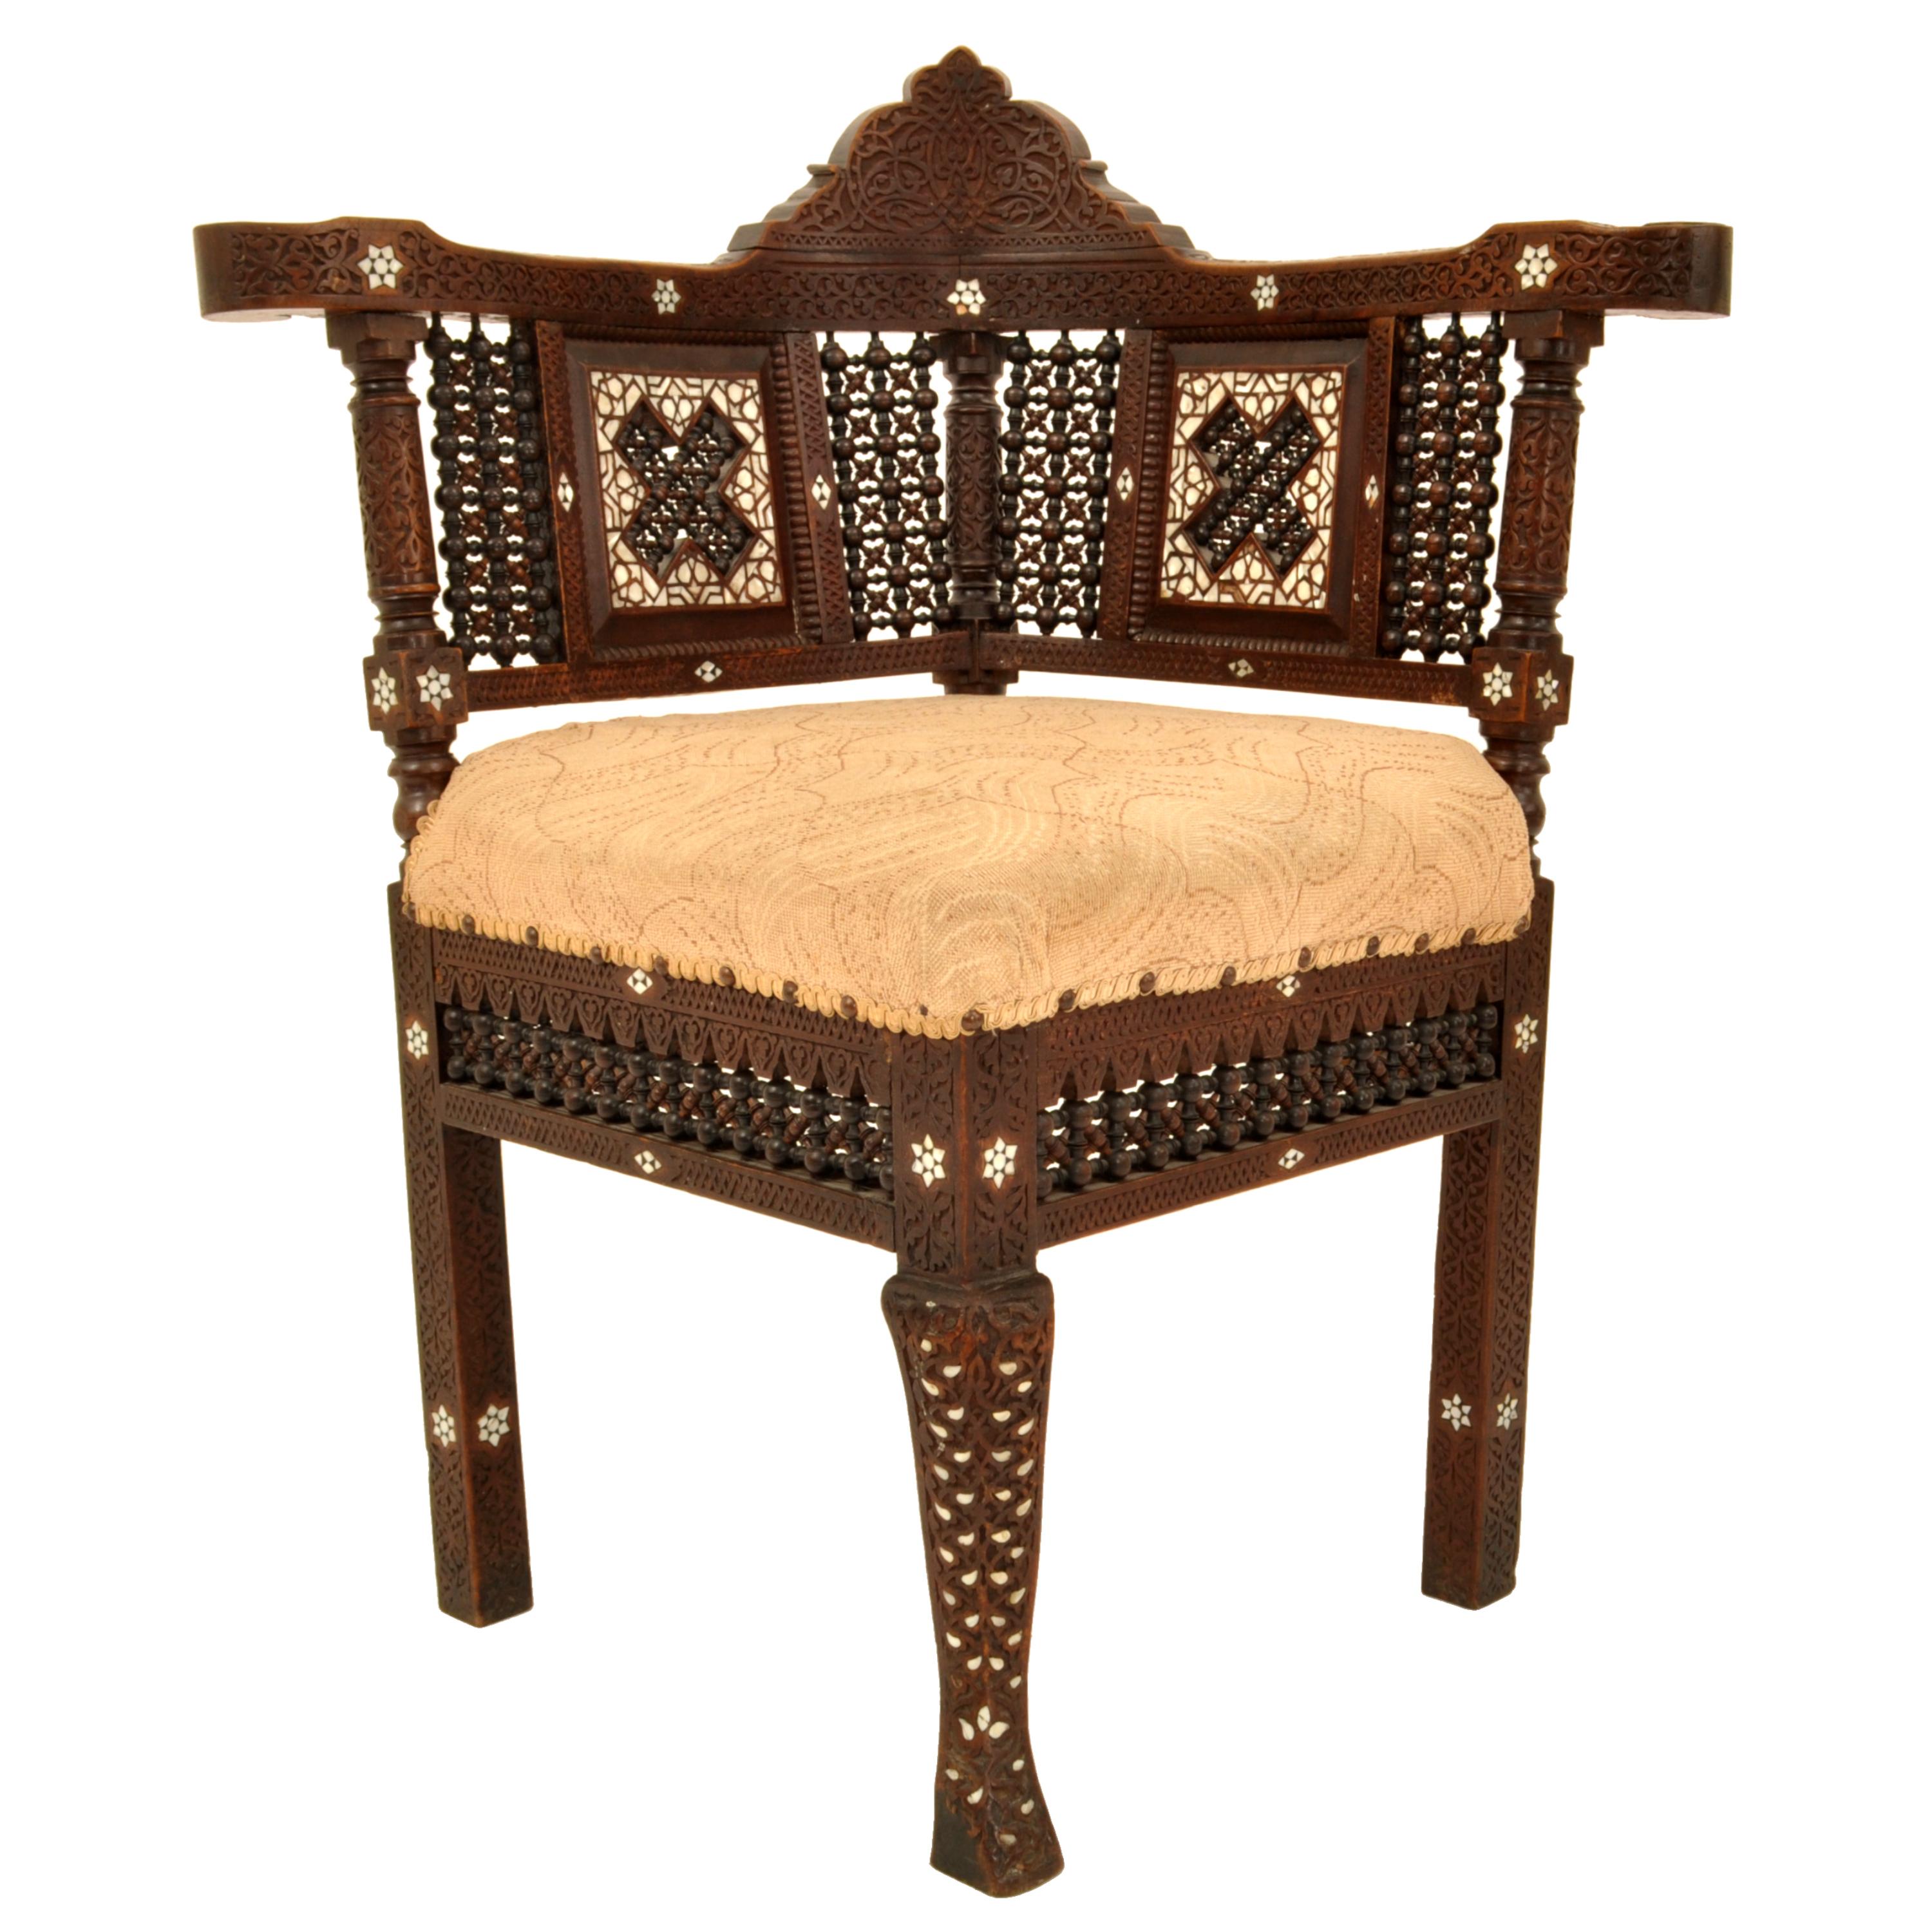 Antique Islamic Moorish Syrian Carved Inlaid Mother of Pearl Corner Chair 1880